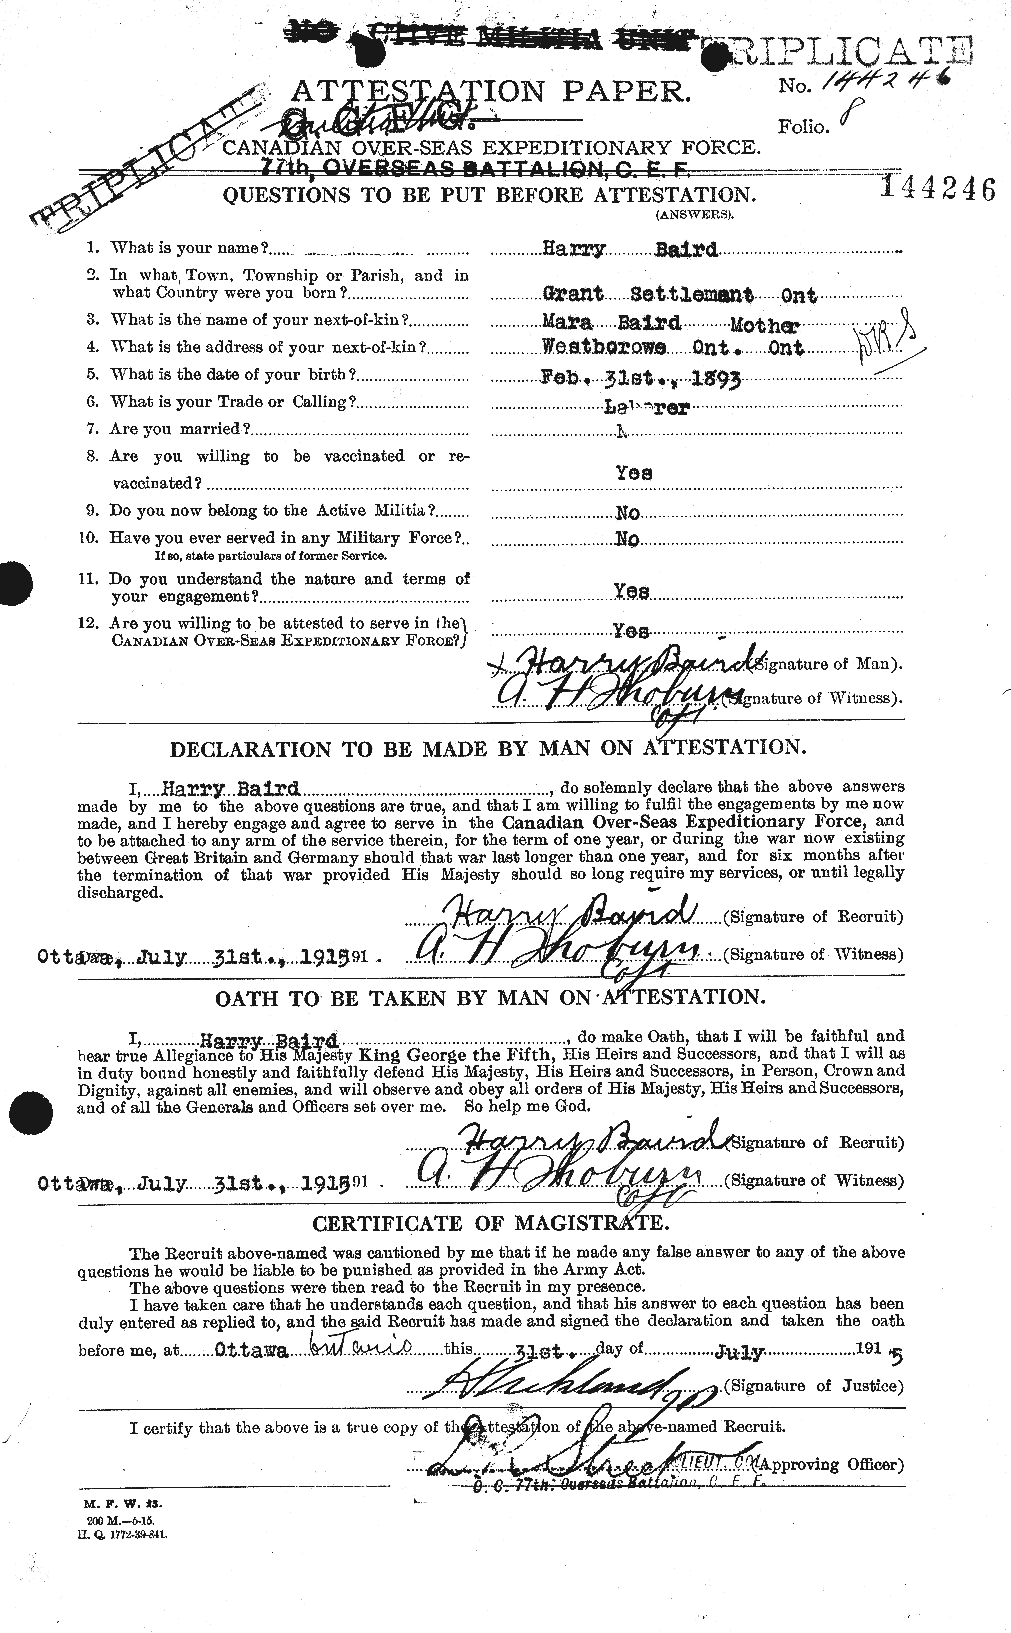 Personnel Records of the First World War - CEF 226657a